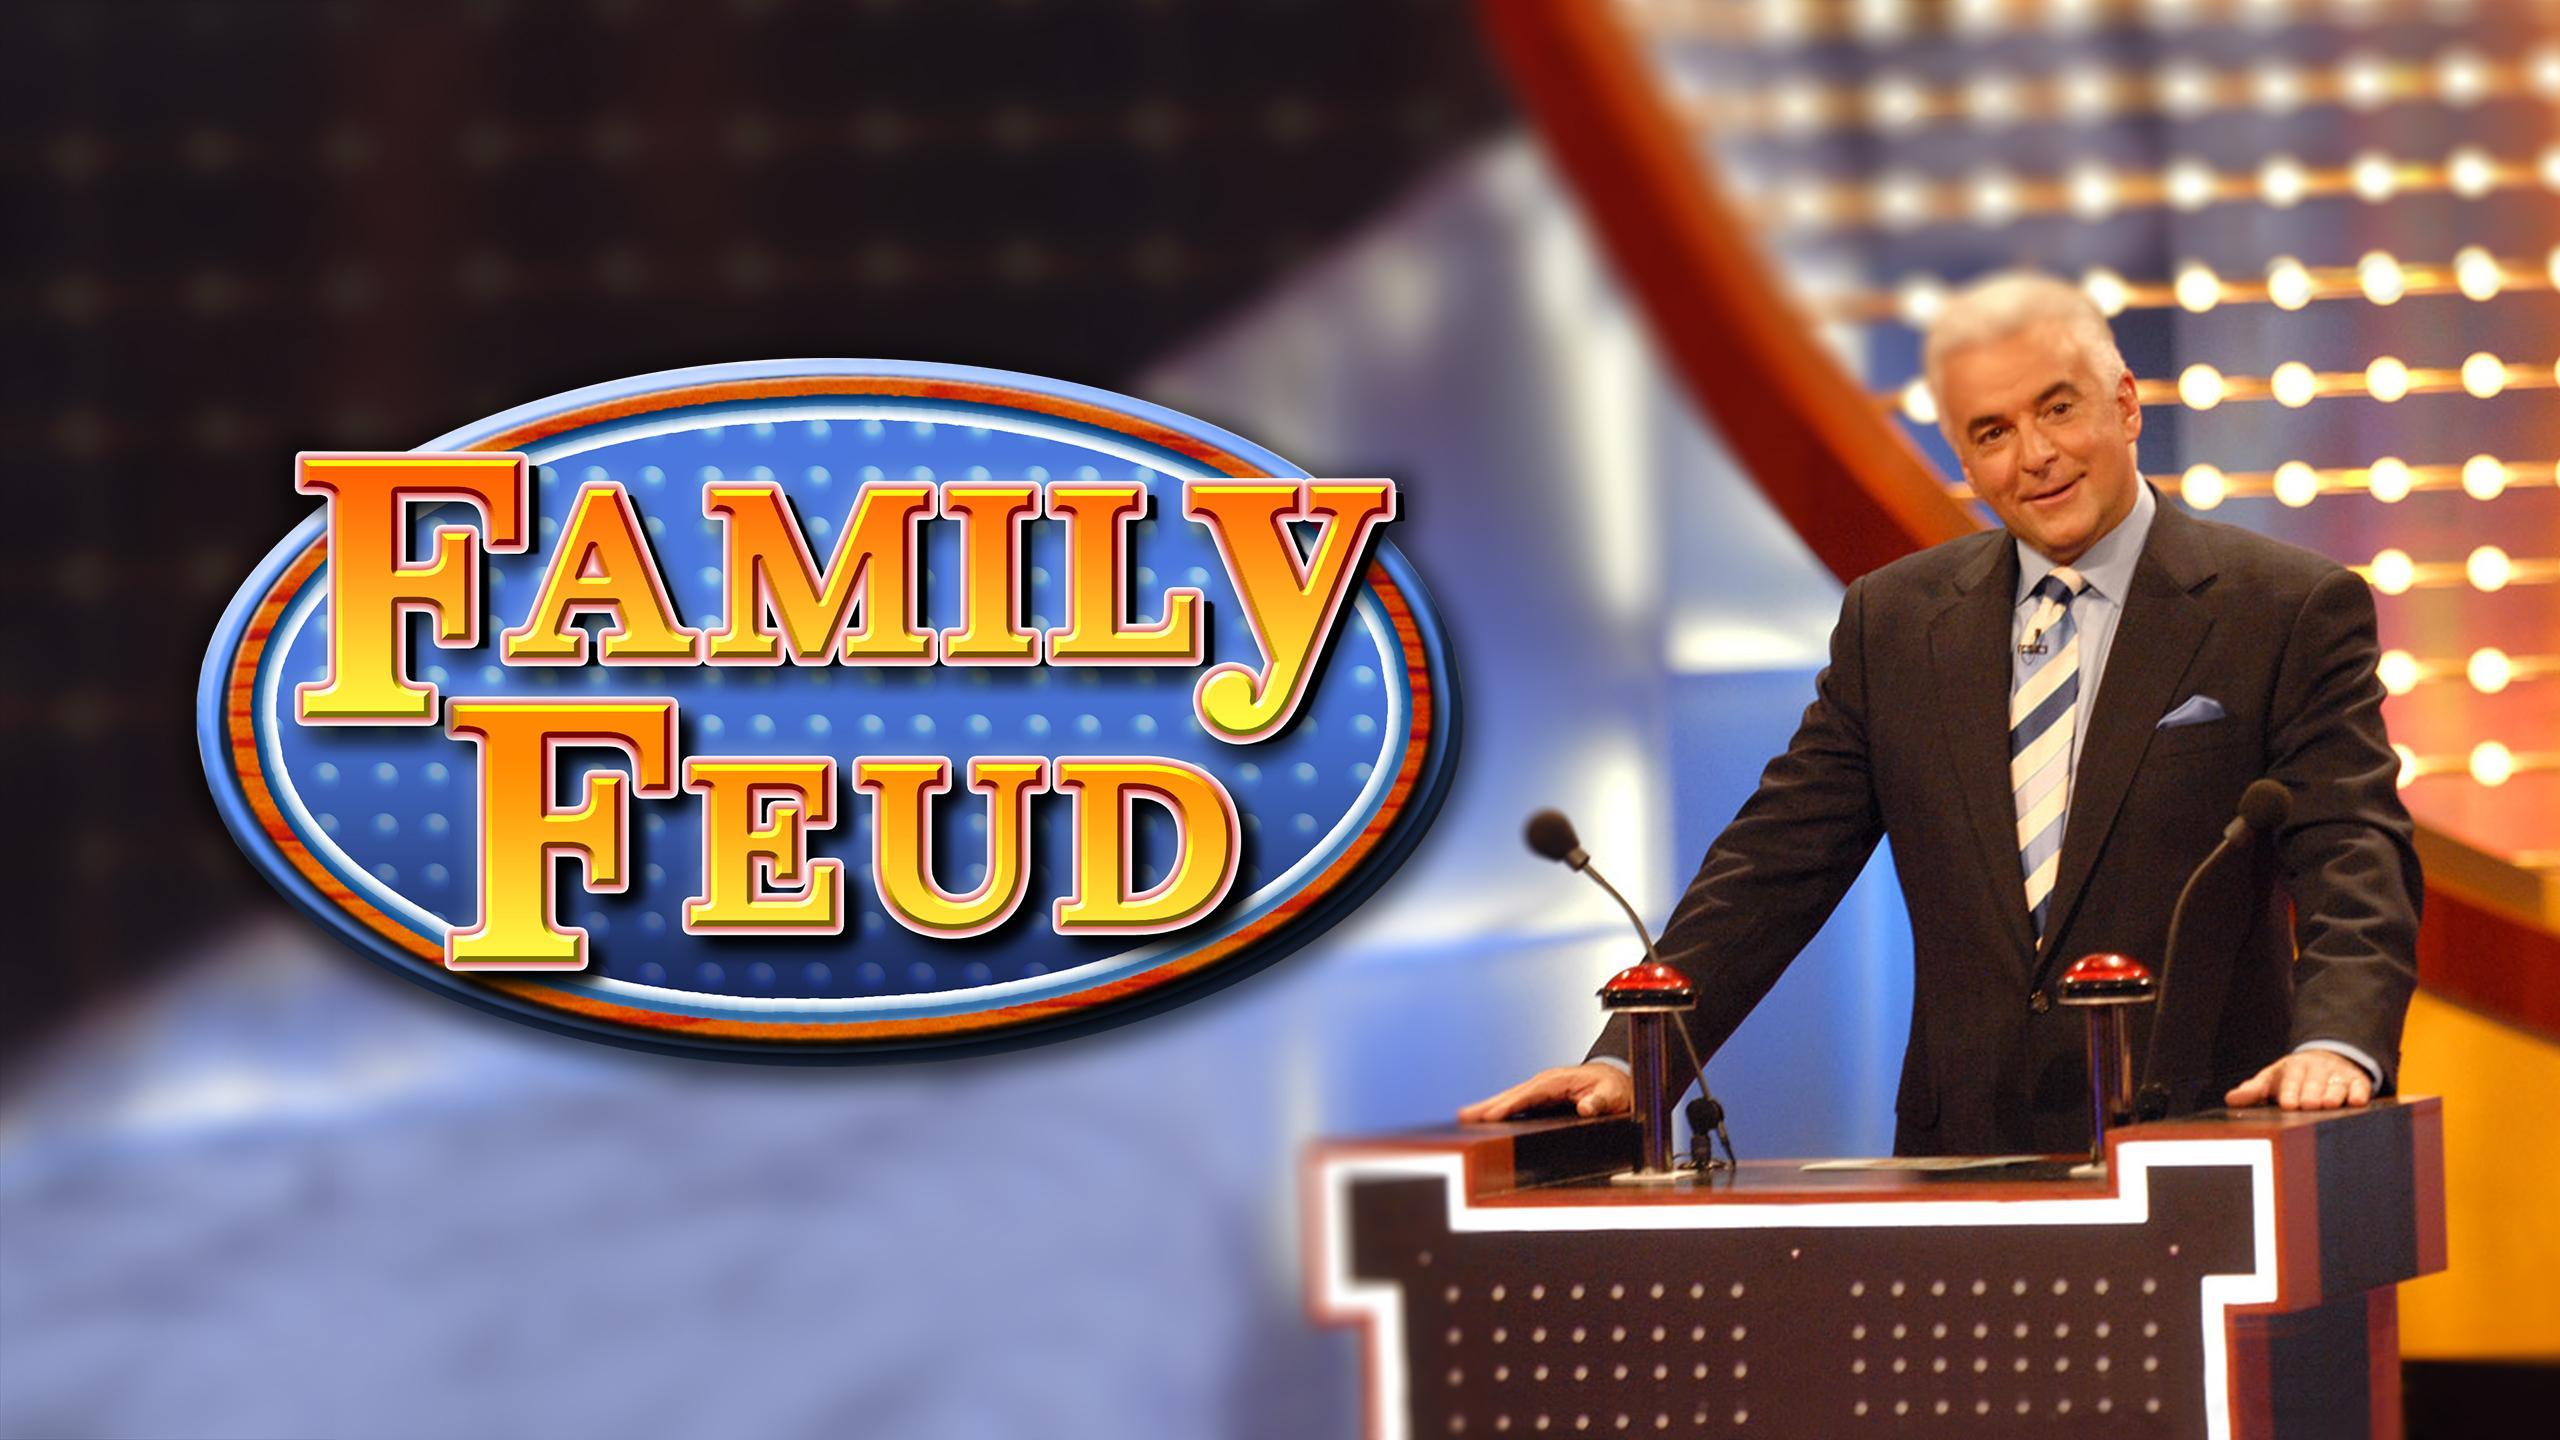 family feud full episodes hd